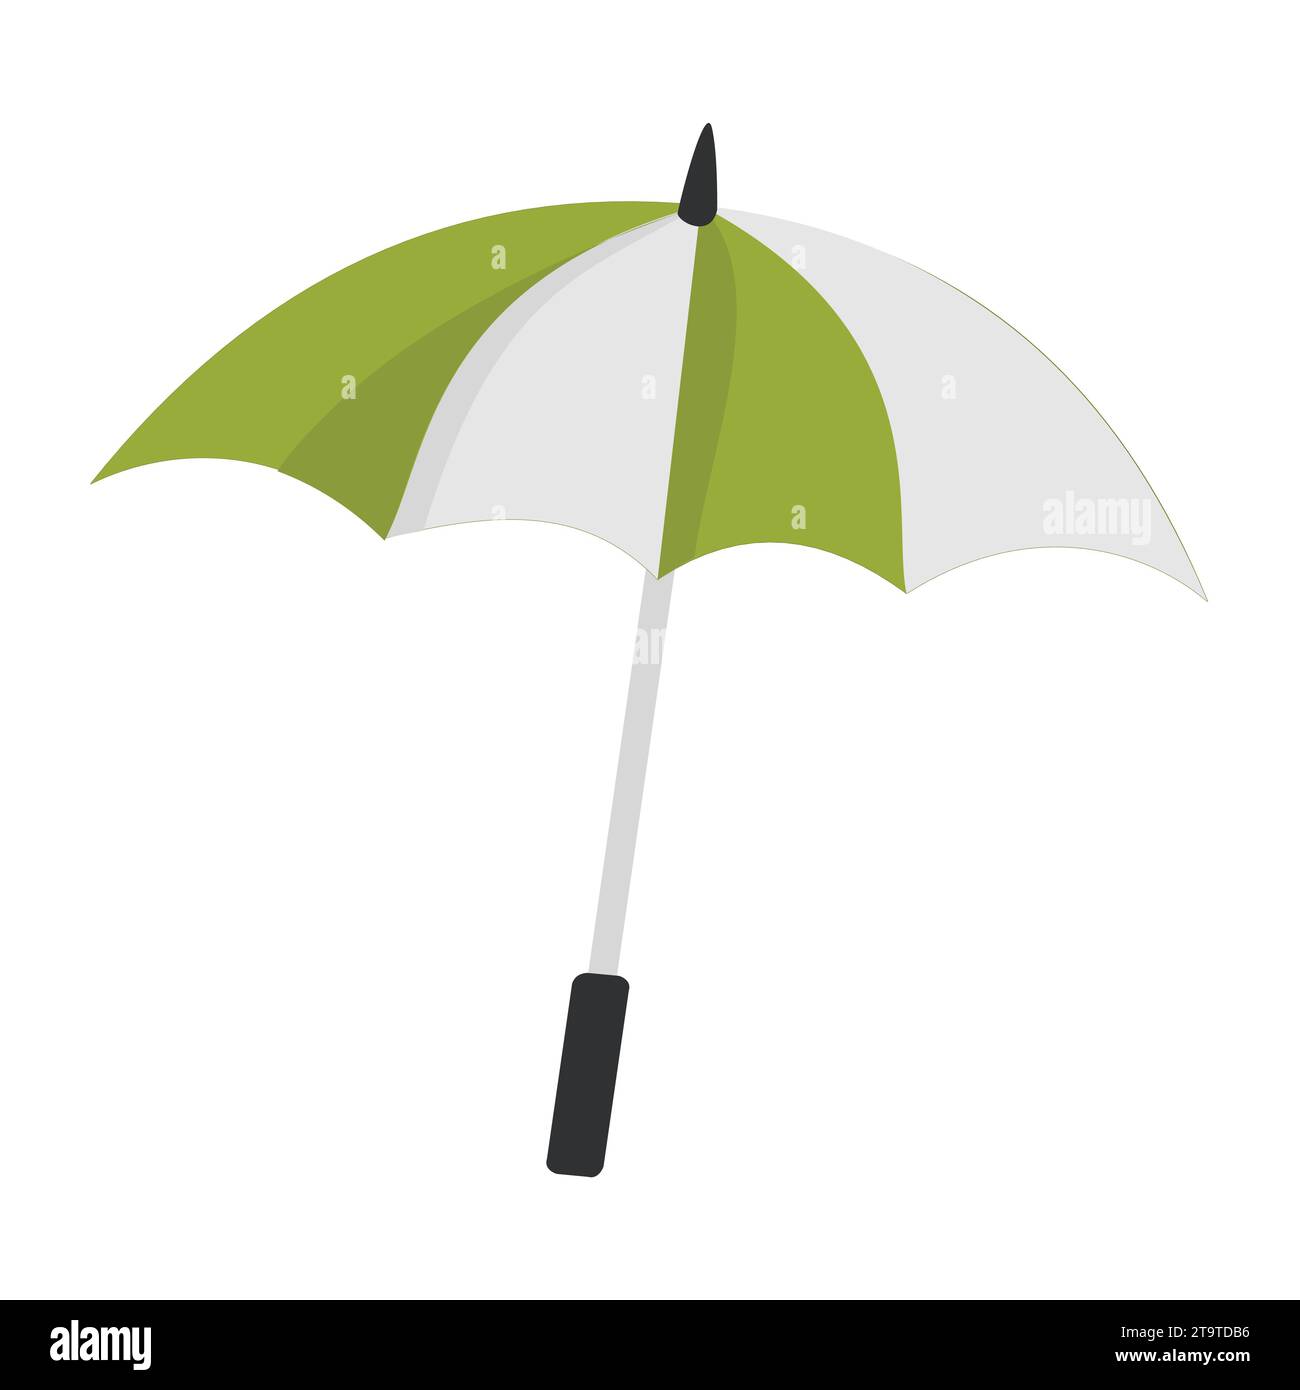 Flat illustration of umbrella vector icon for web and apps Stock Vector